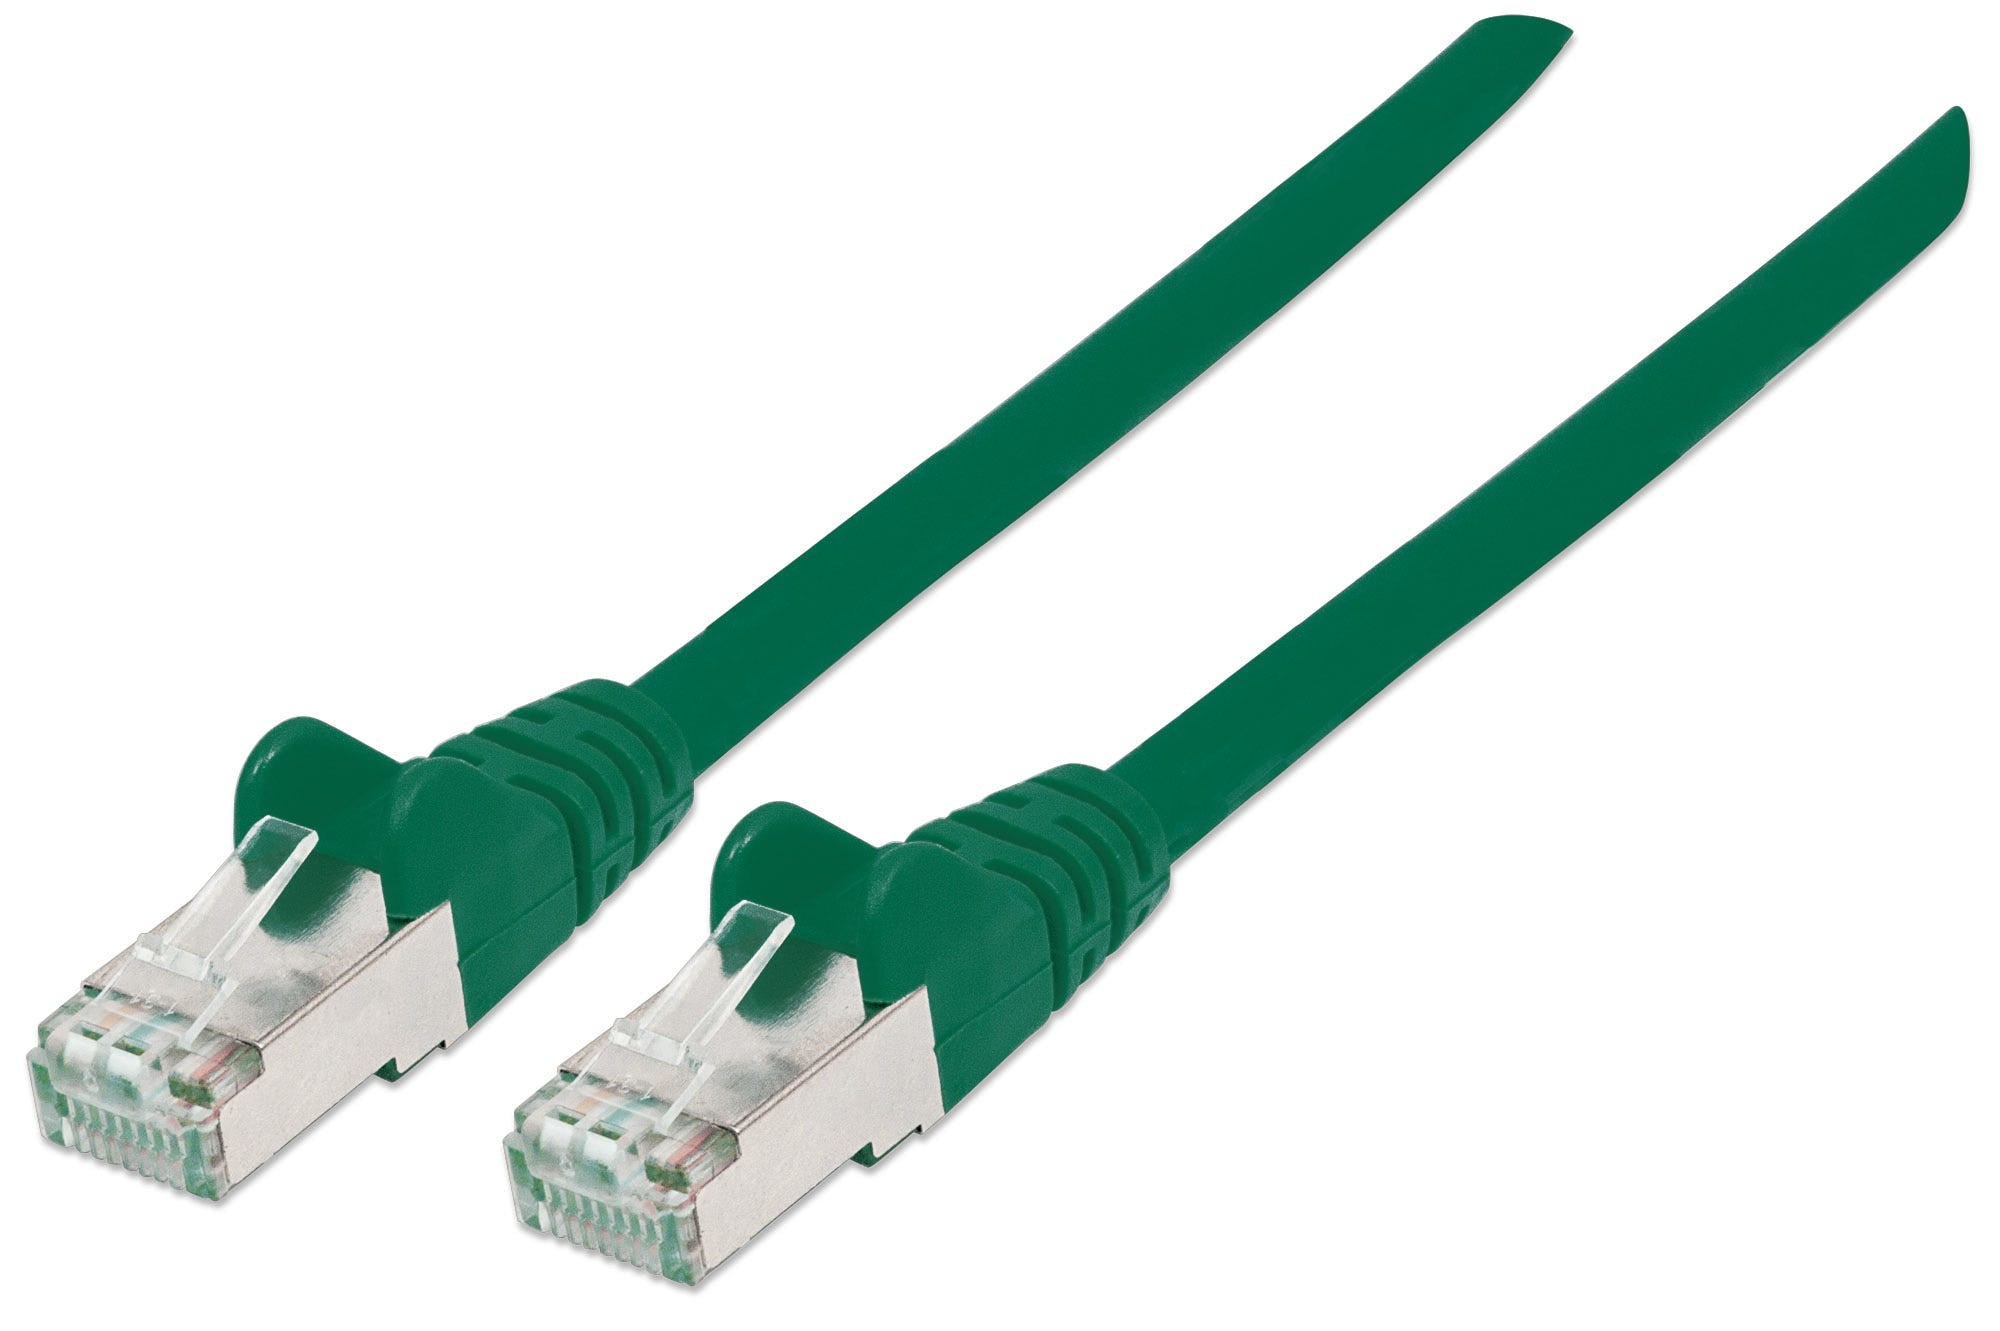 Intellinet Network Patch Cable, Cat6A, 2m, Green, Copper, S/FTP, LSOH / LSZH, PVC, RJ45, Gold Plated Contacts, Snagless, Booted, Lifetime Warranty, Polybag